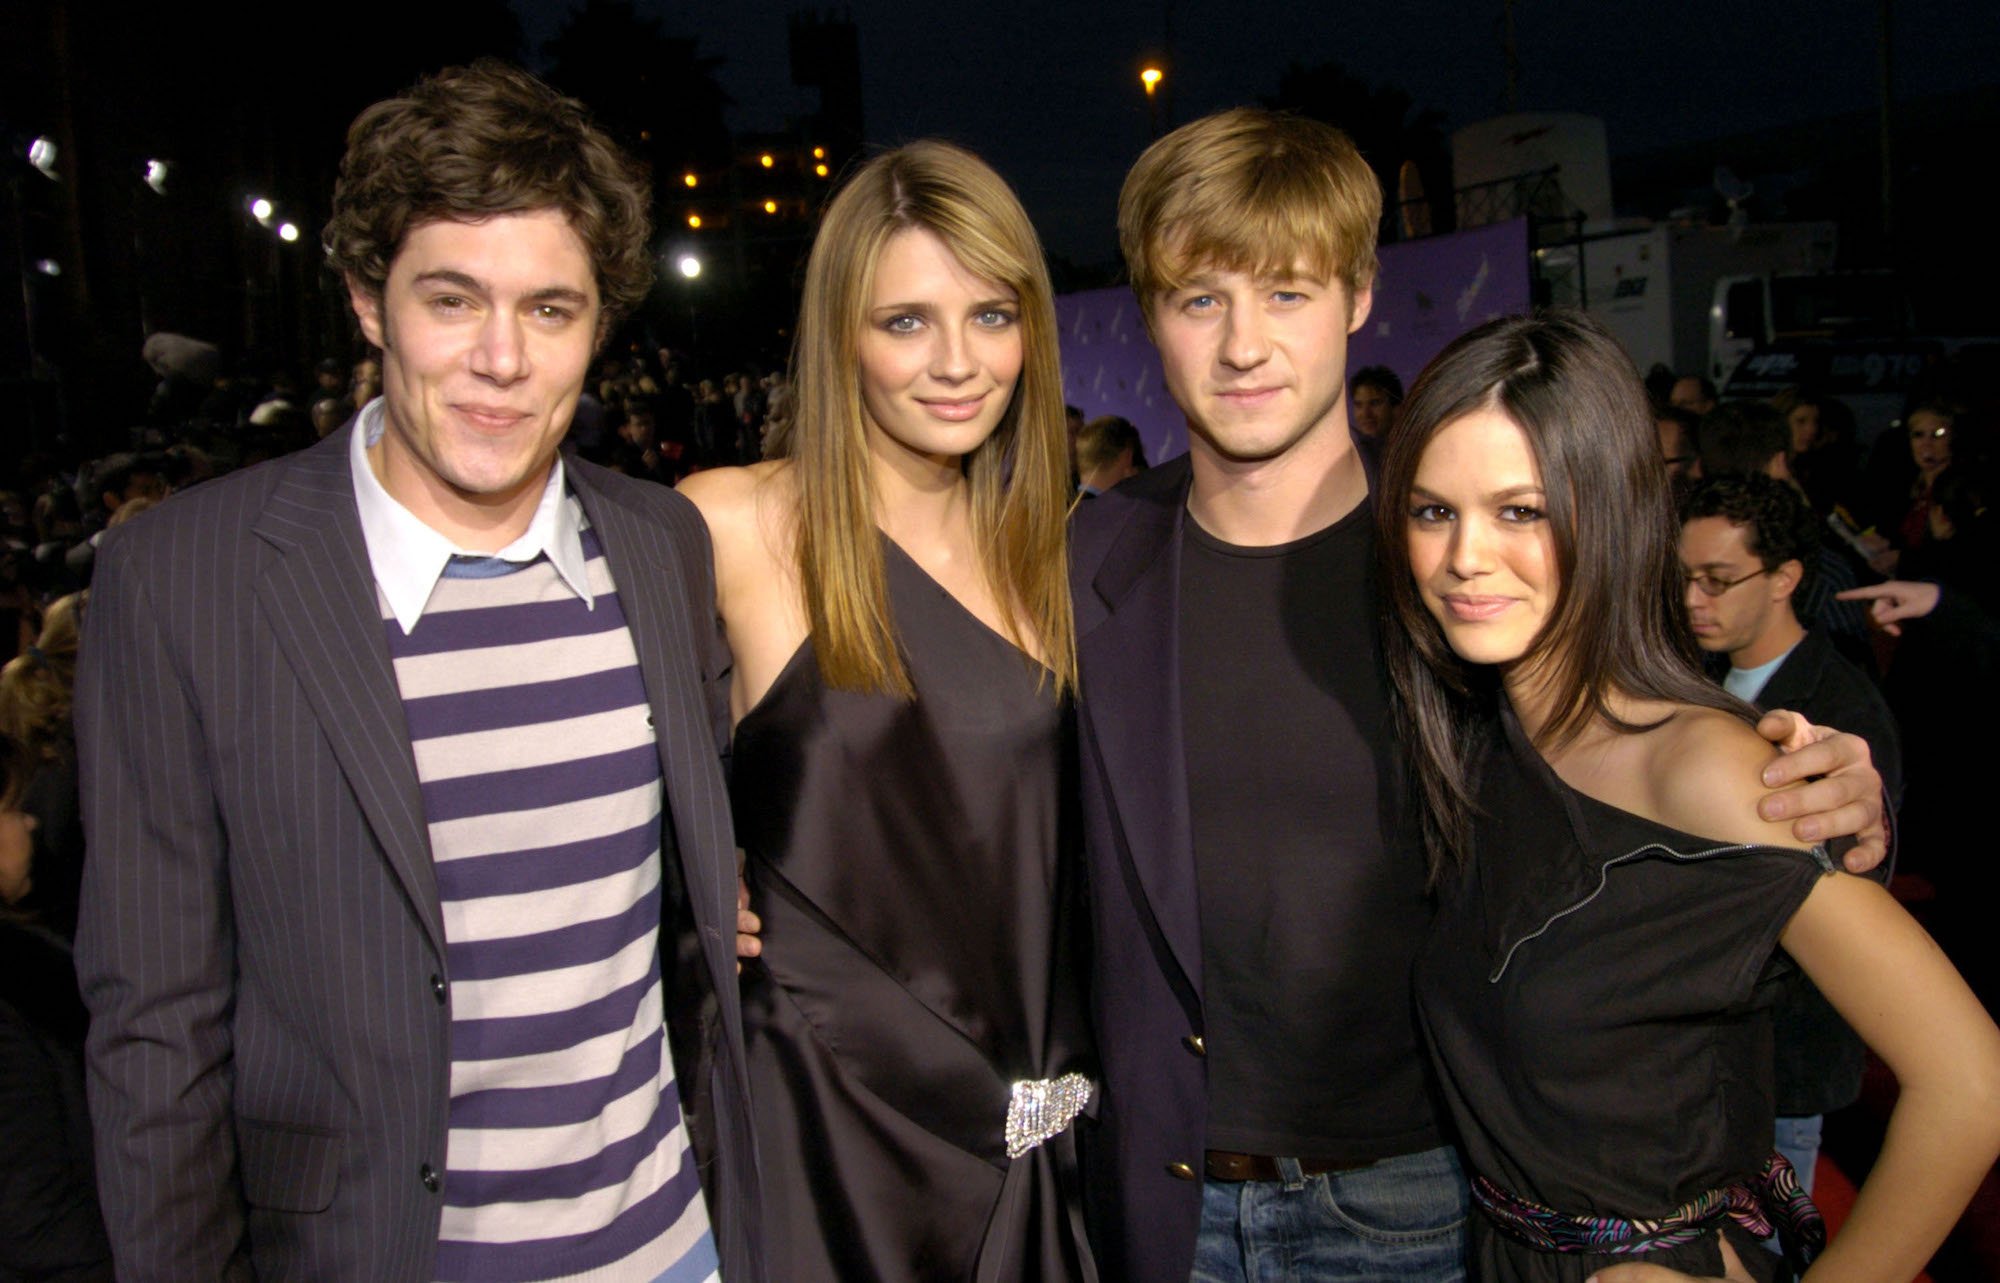 ‘The O.C.’: 3 of the Most Absurd Plot Lines From the Series